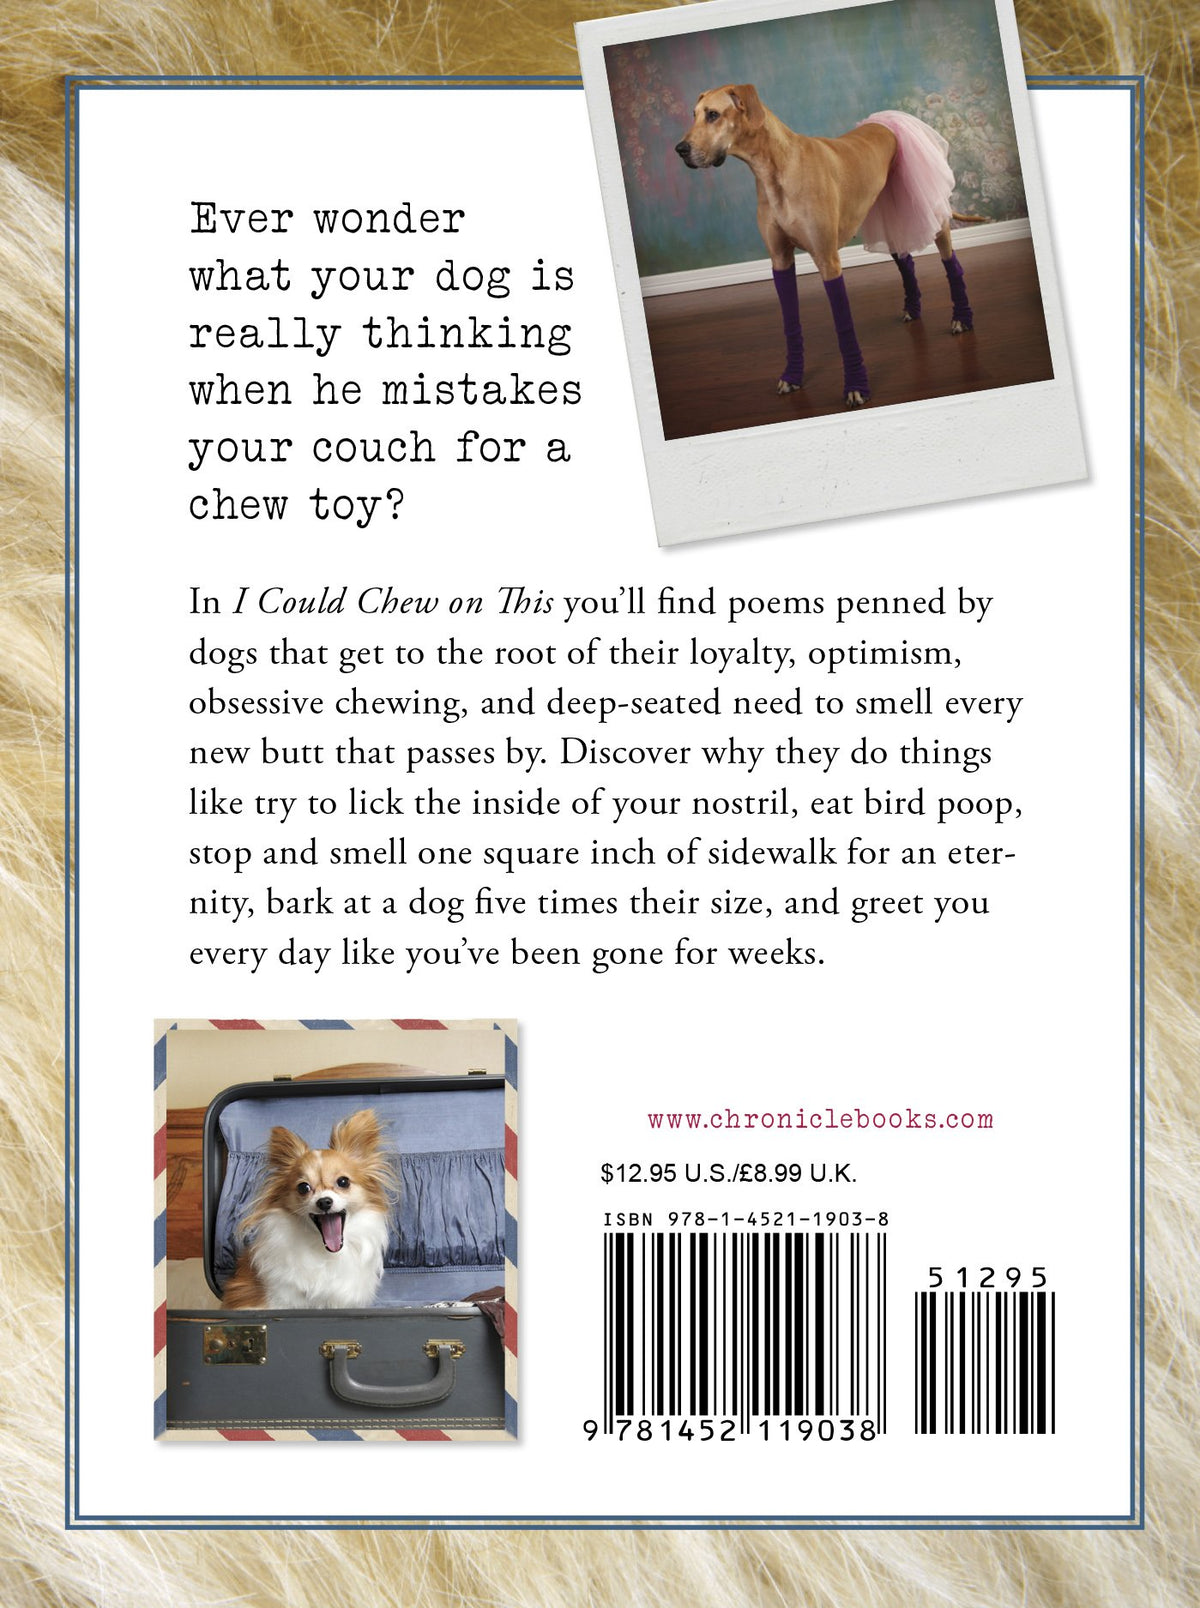 I Could Chew on This And Other Poems by Dogs